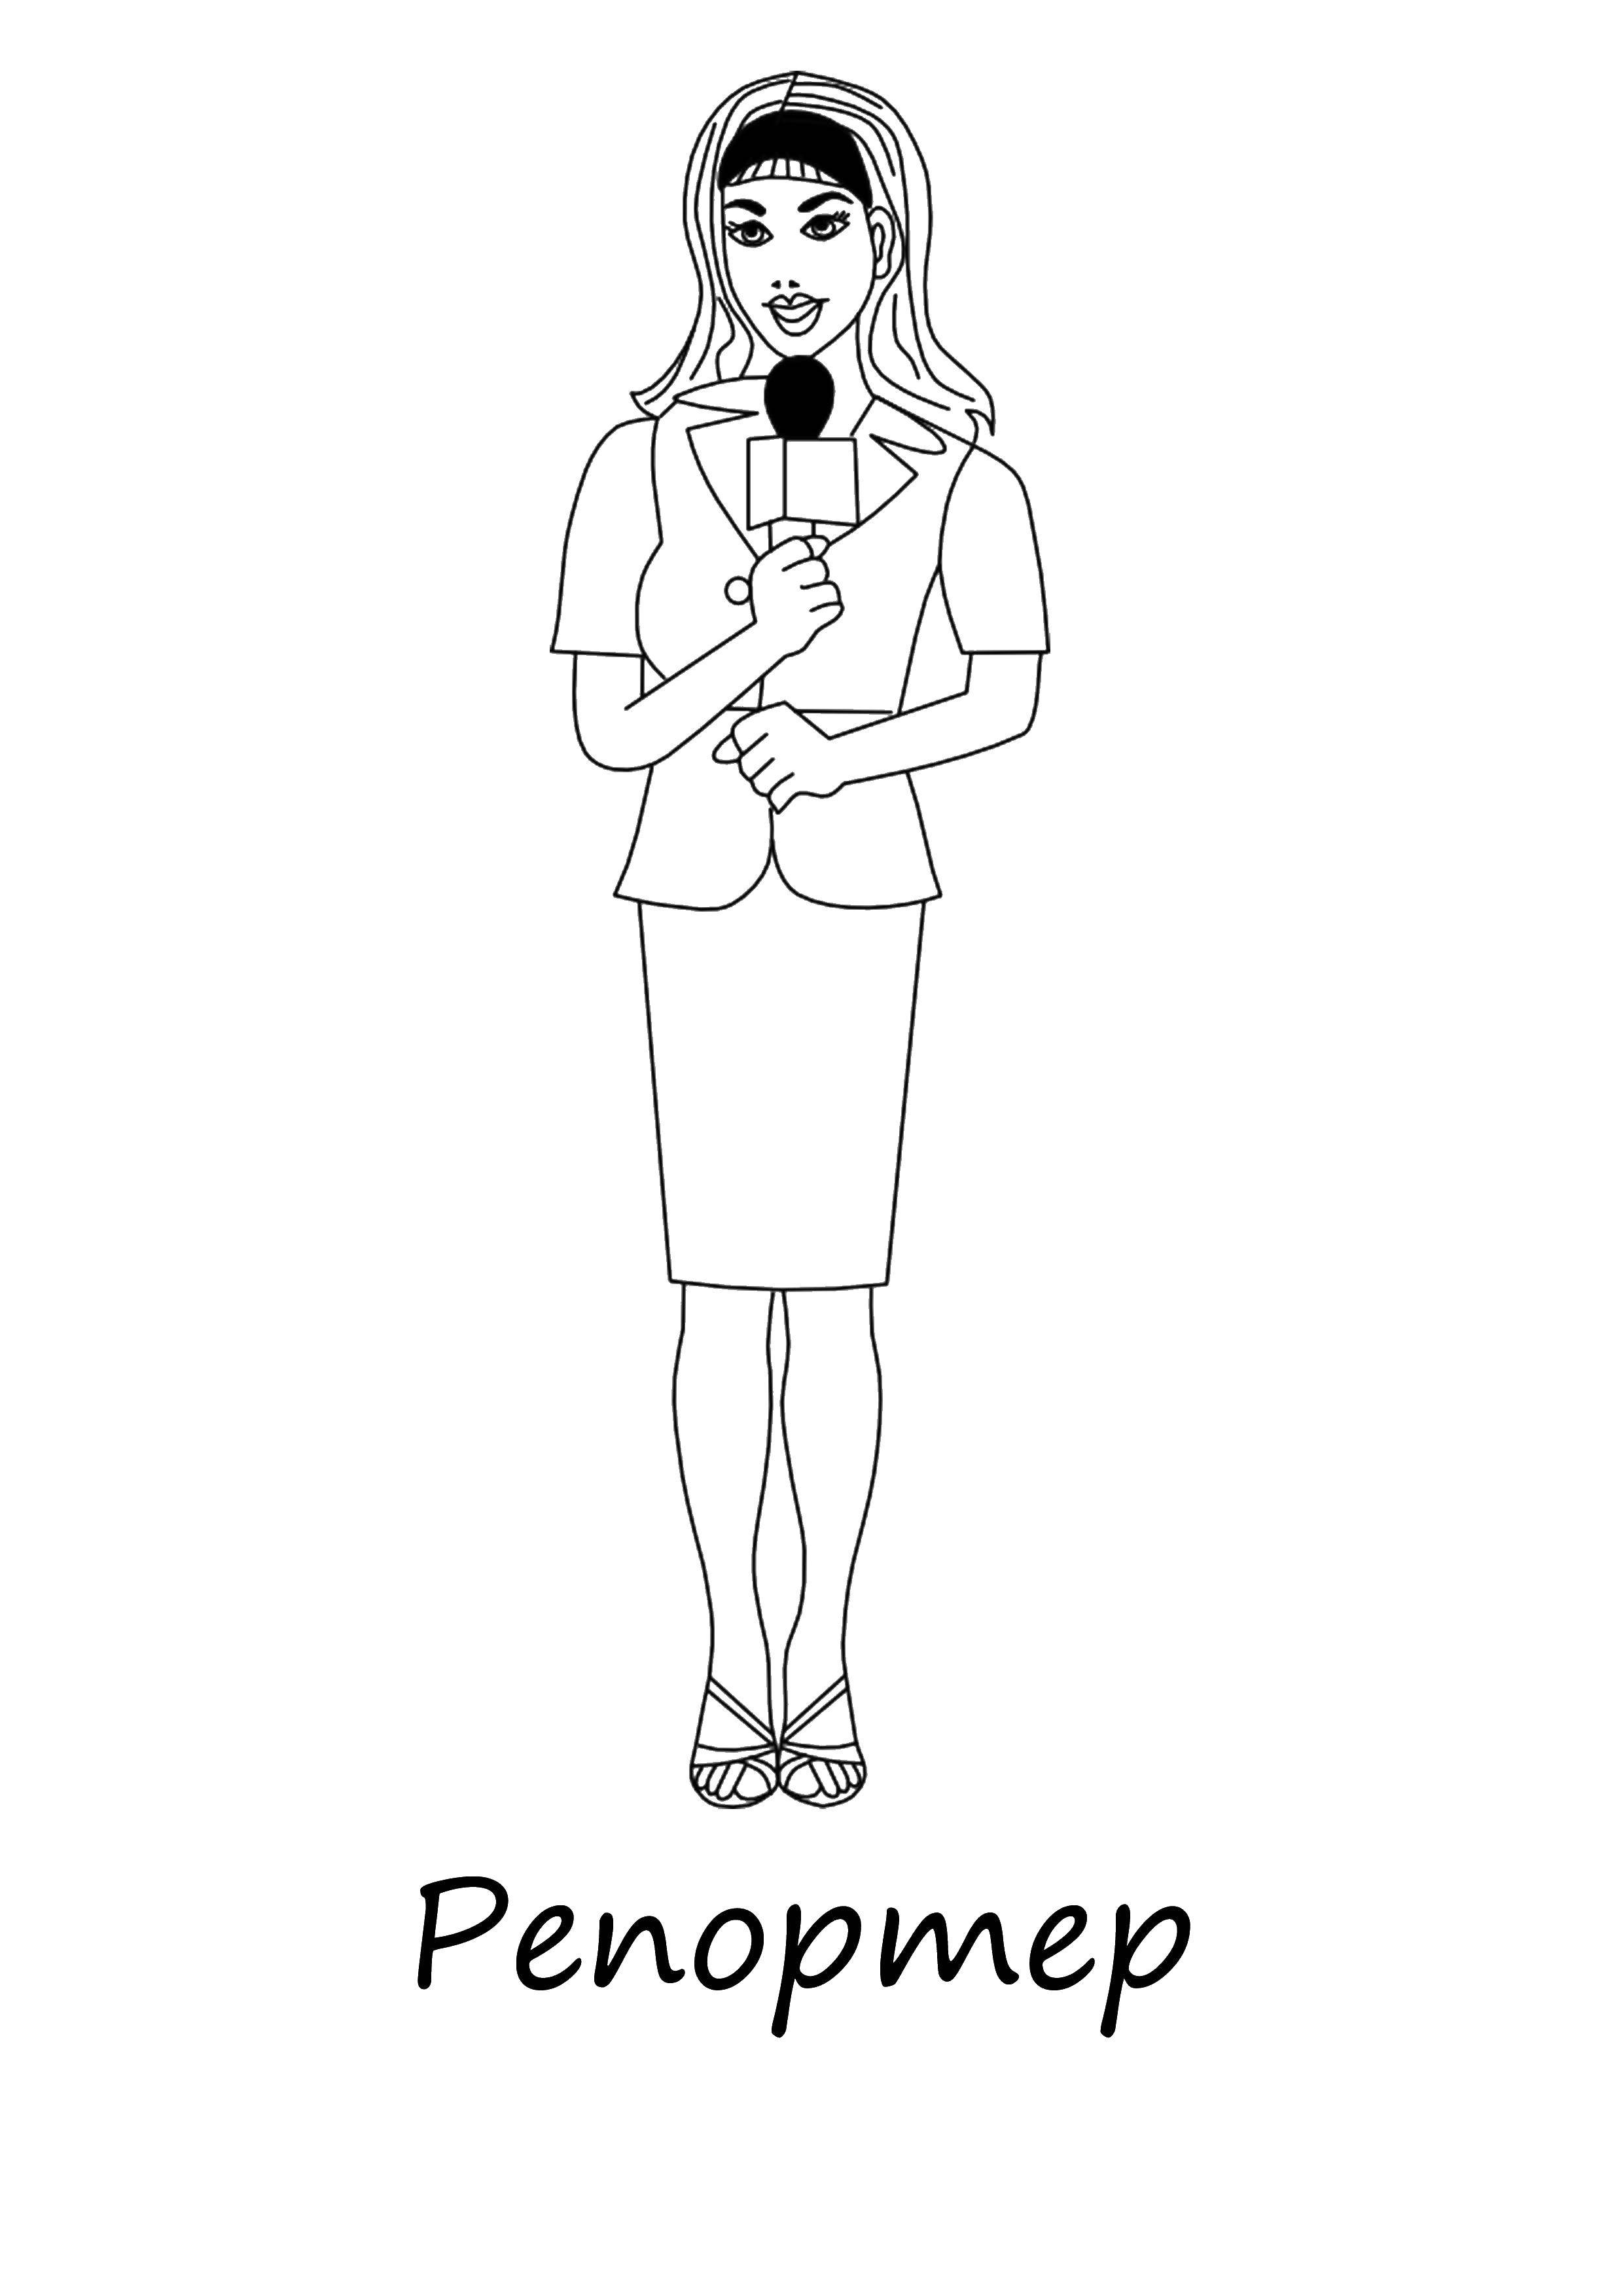 Coloring Reporter. Category a profession. Tags:  profession, reporter.